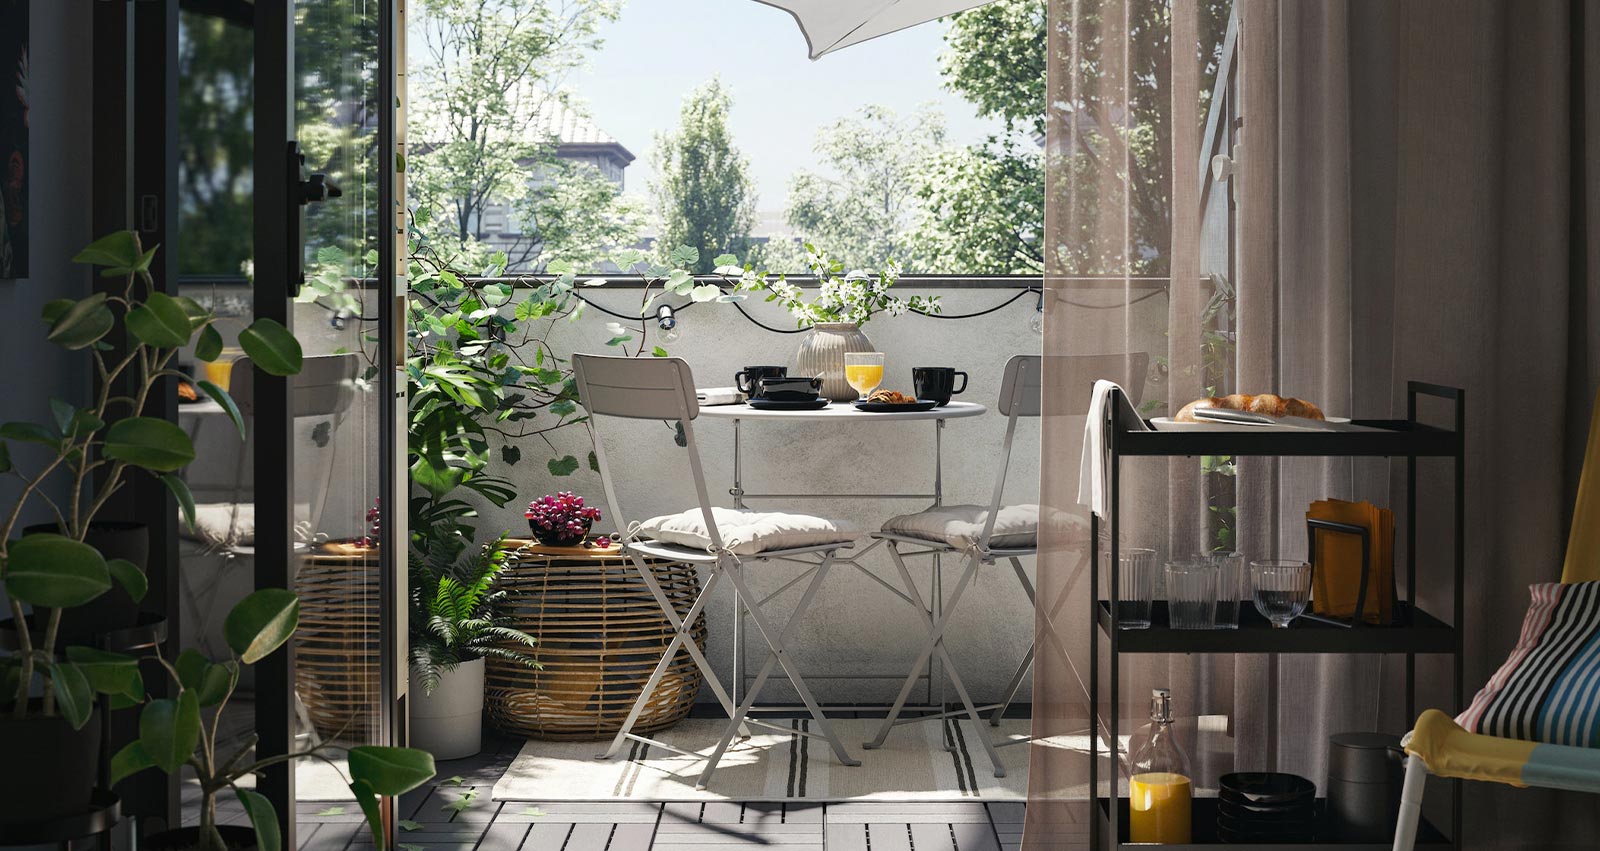 IKEA-how to decorate small outdoor space 1